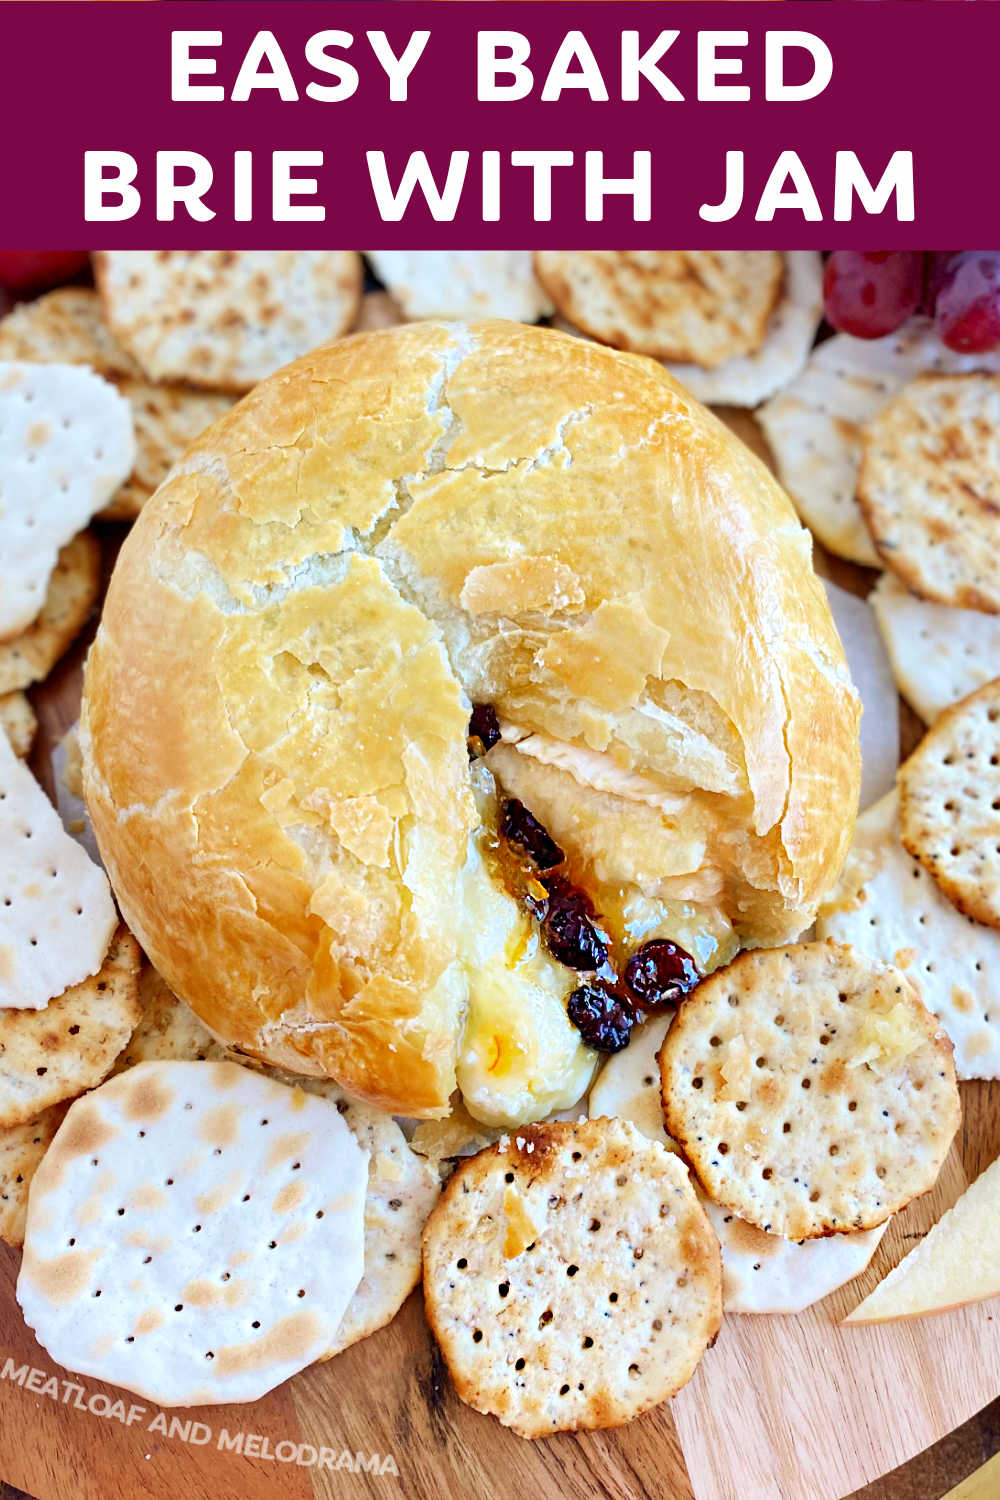 Baked Brie with Jam in puff pastry (Brie en croute) is an easy appetizer recipe with brie cheese, orange marmalade and dried cranberries wrapped in puff pastry dough and baked until the pastry is golden and flaky and the cheese is melted. Perfect for the holiday season! via @meamel